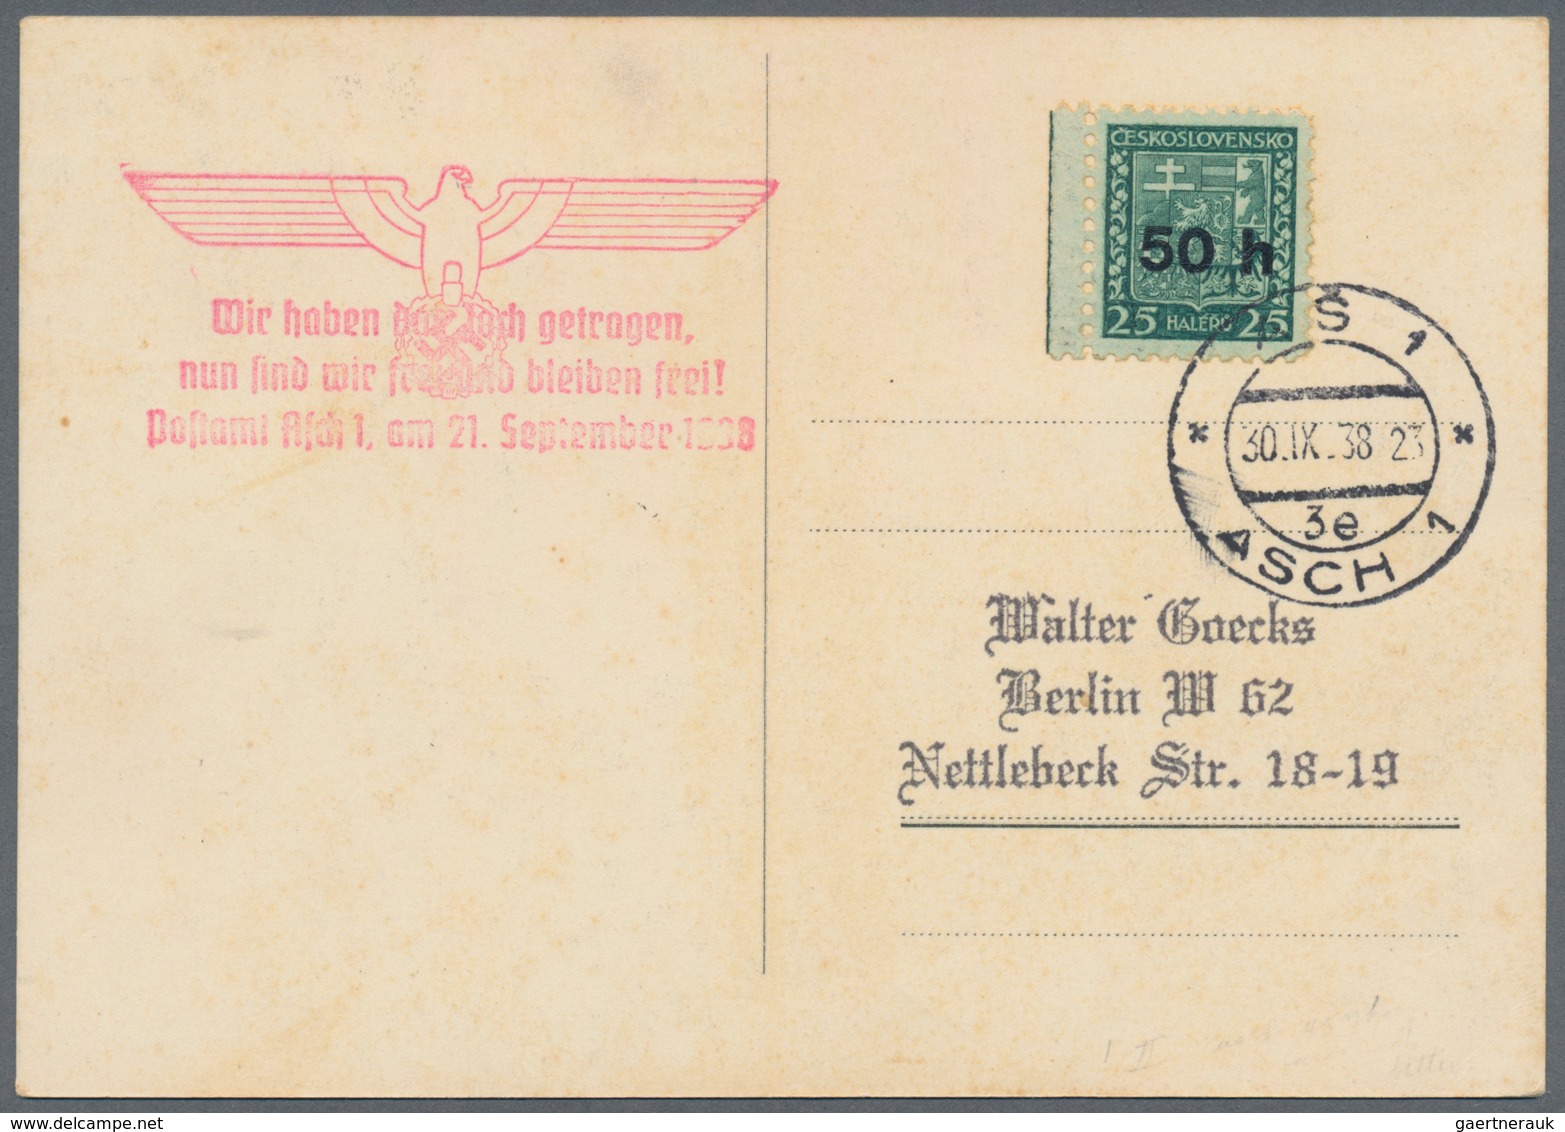 Sudetenland - Asch: 1938. The Narrow Printing Variety With Green Paper, Used On Asch Liberation Prop - Région Des Sudètes